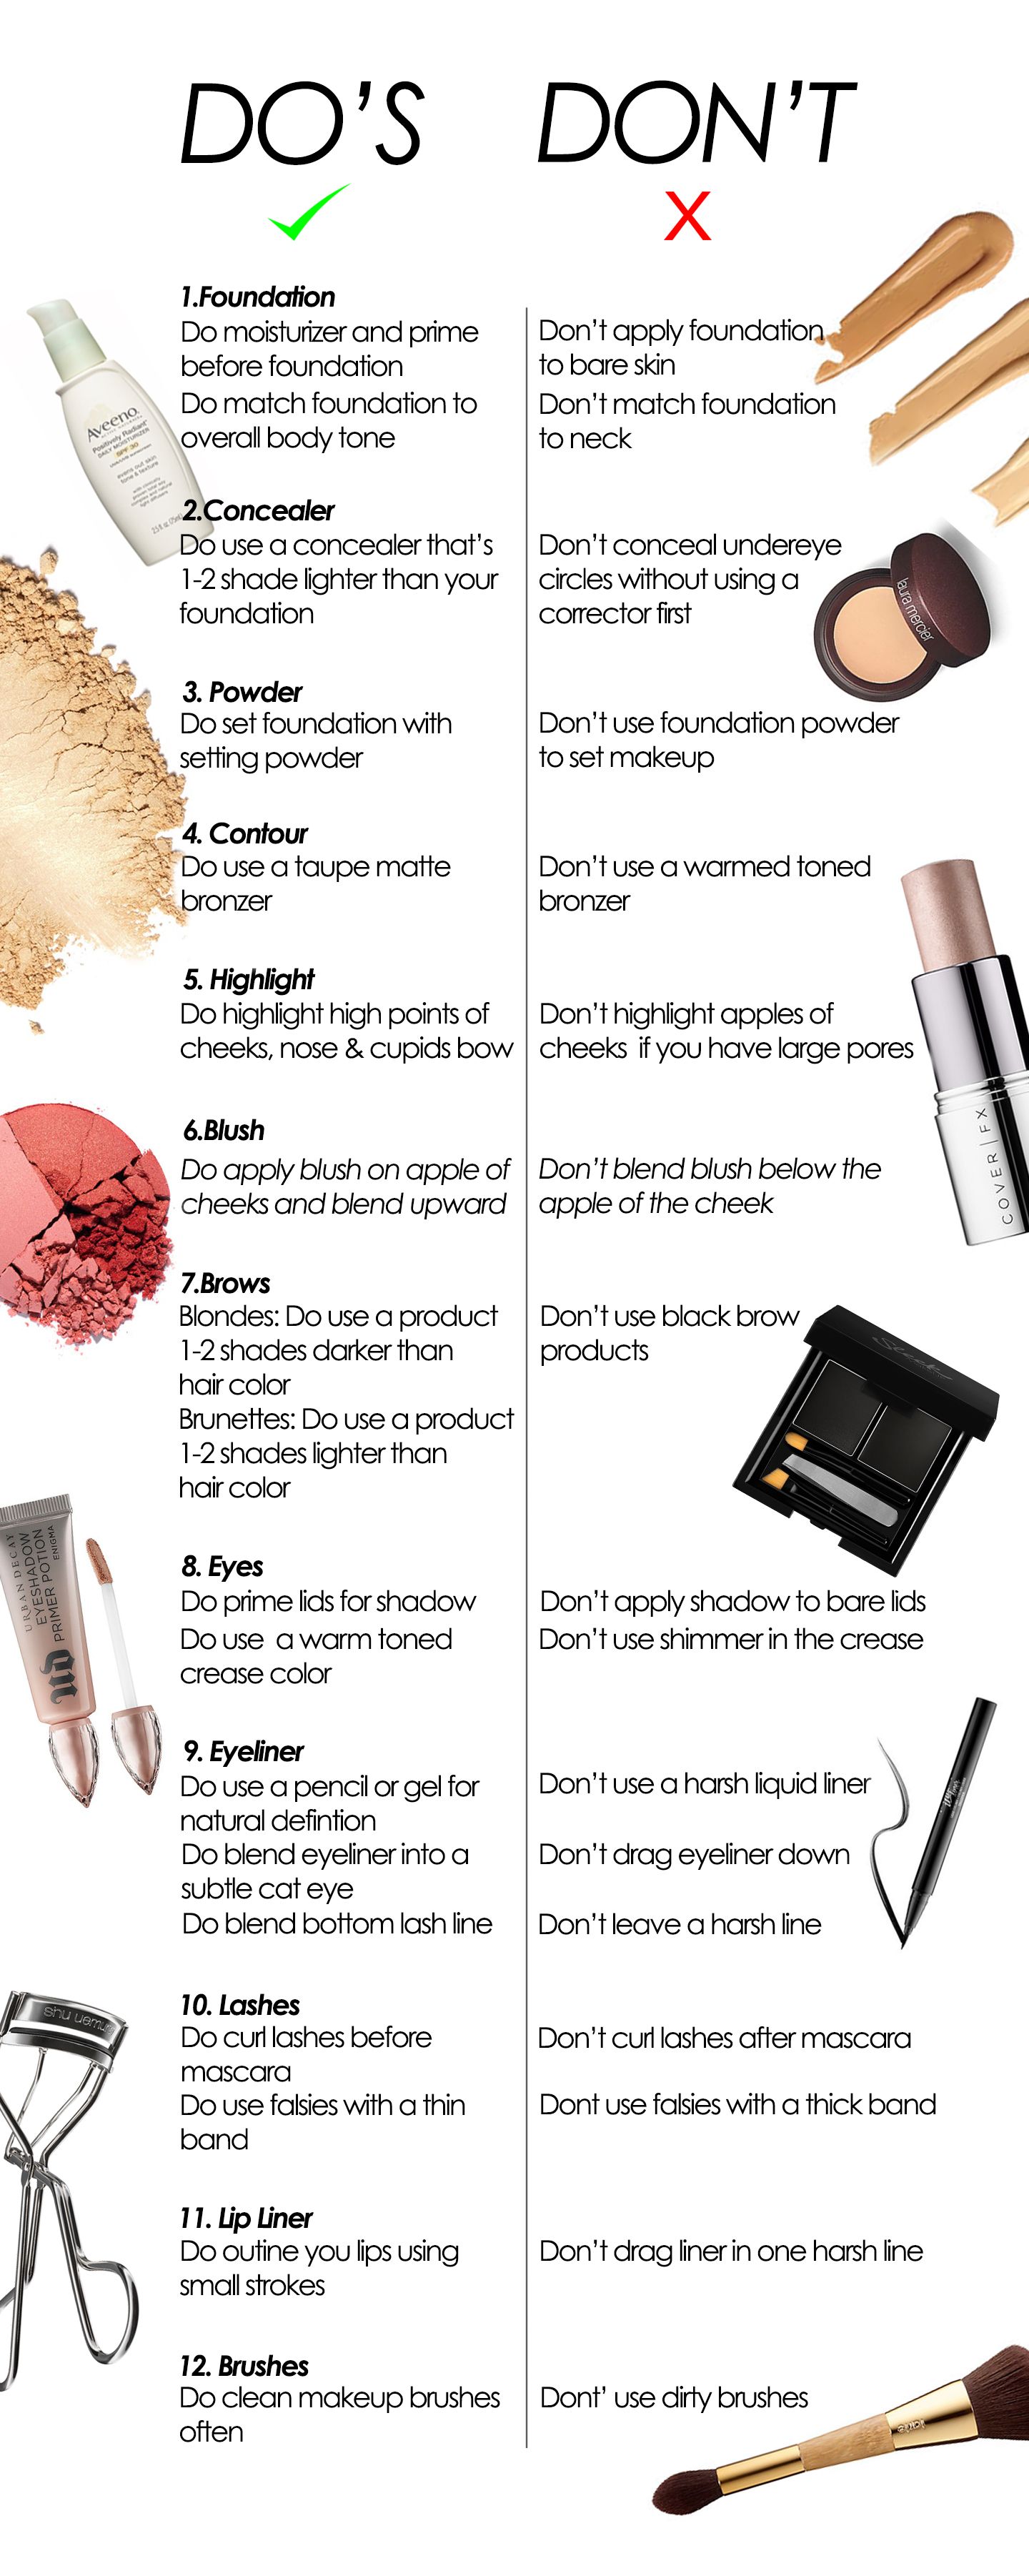 12 Common Makeup Mistakes That Age You